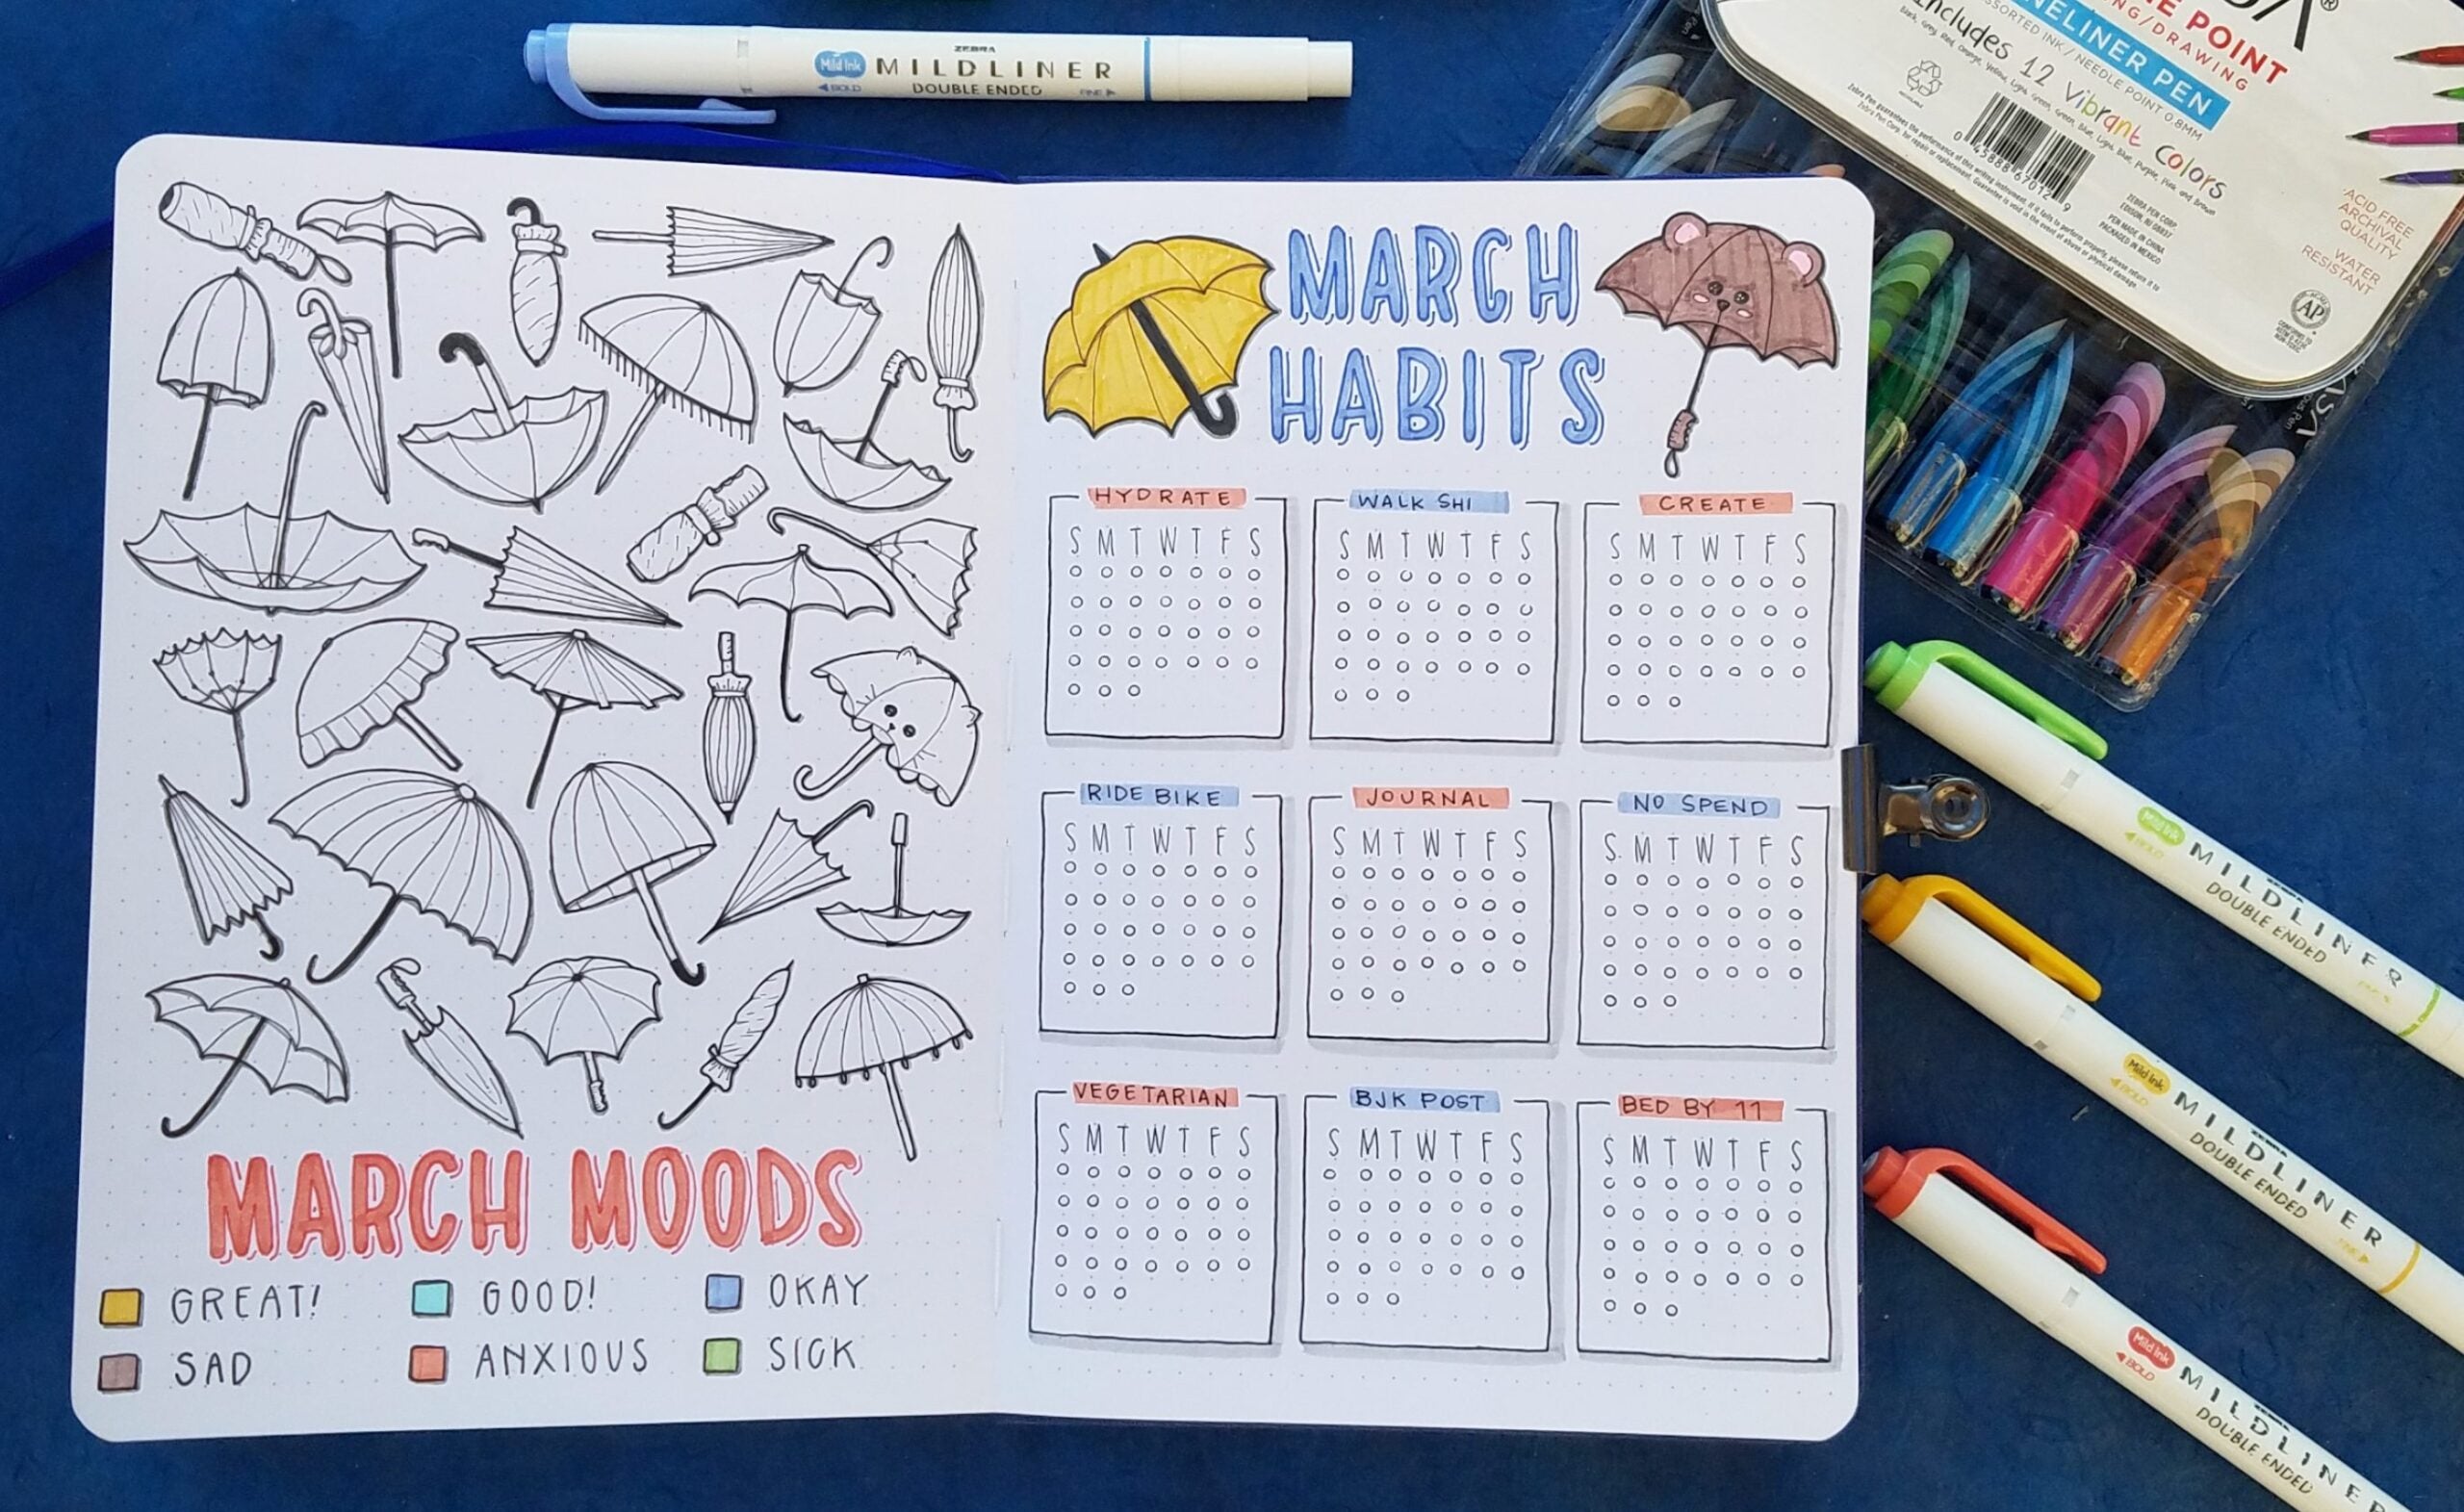 How to Create a Habit and Mood Tracker in Your Bullet Journal